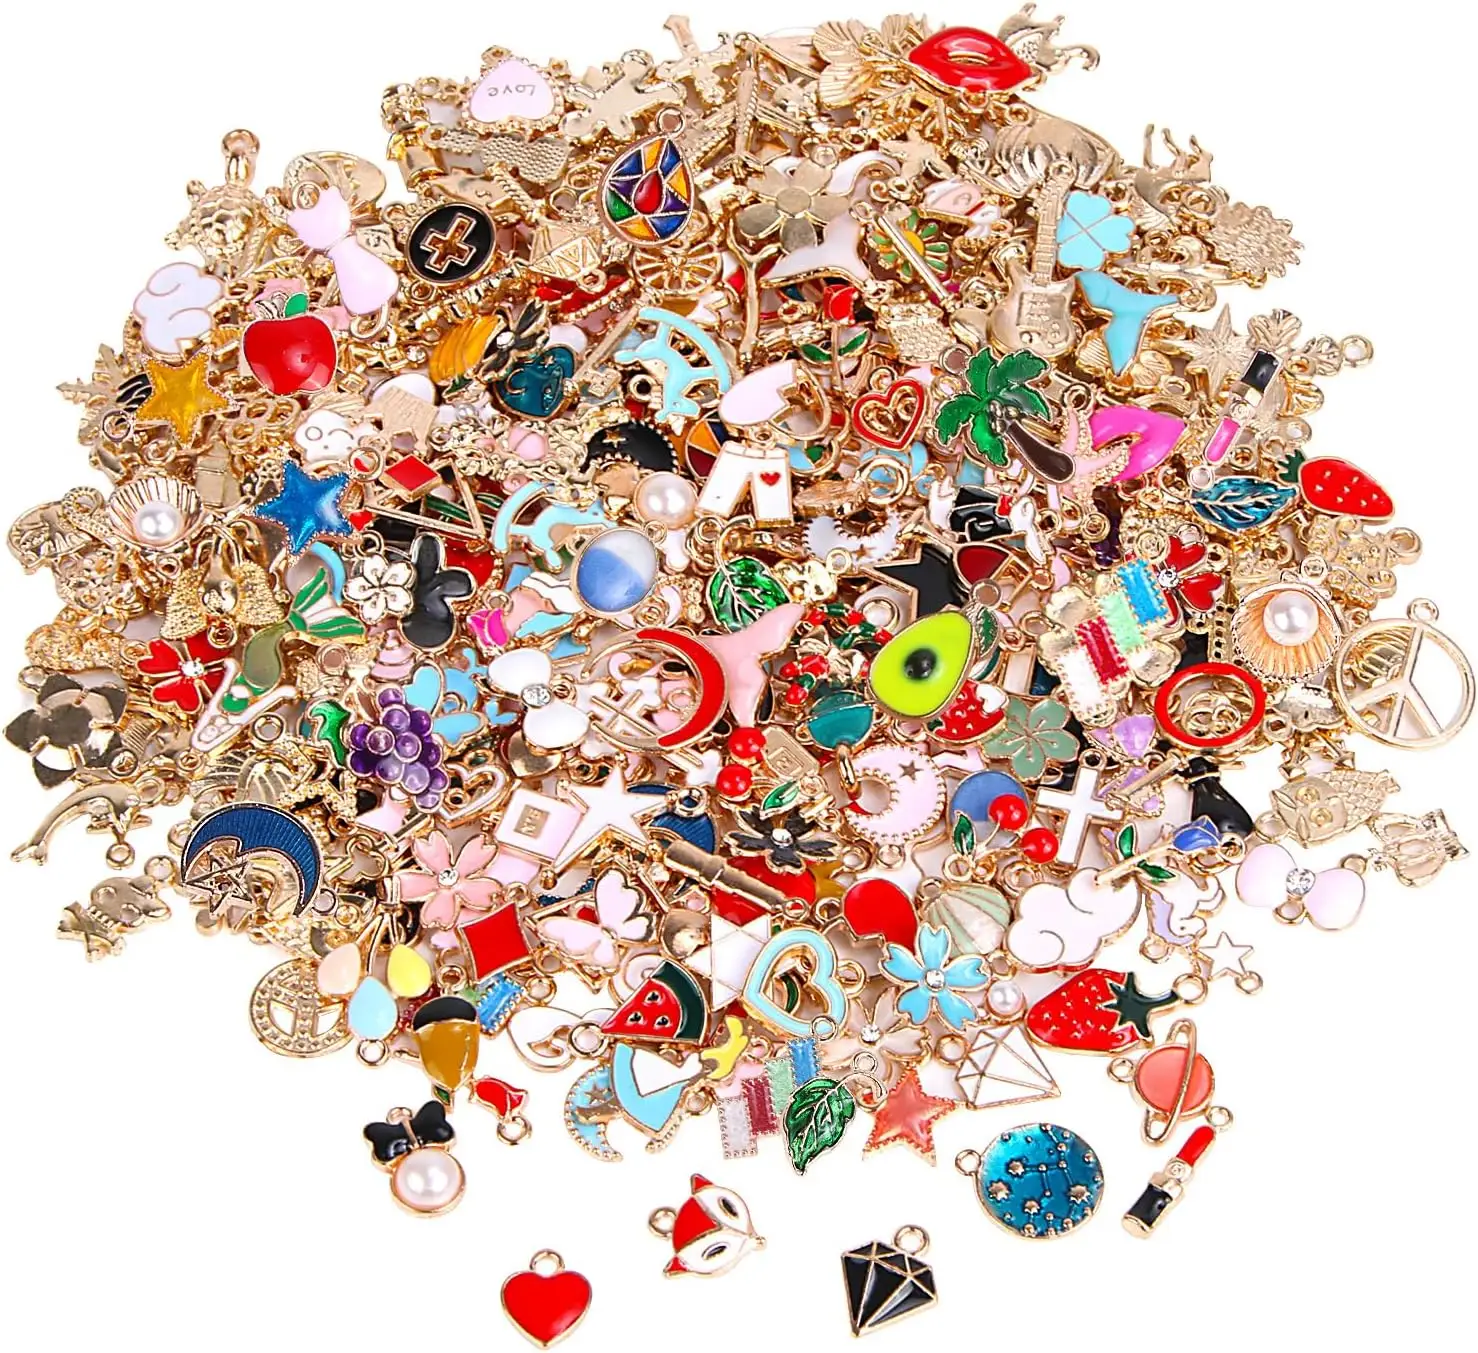 Wholesale Bulk Lots of Gold Plated Enamel Pendants & Charms Assorted Jewelry Making Charms DIY Necklace Bracelet Earring Crafts